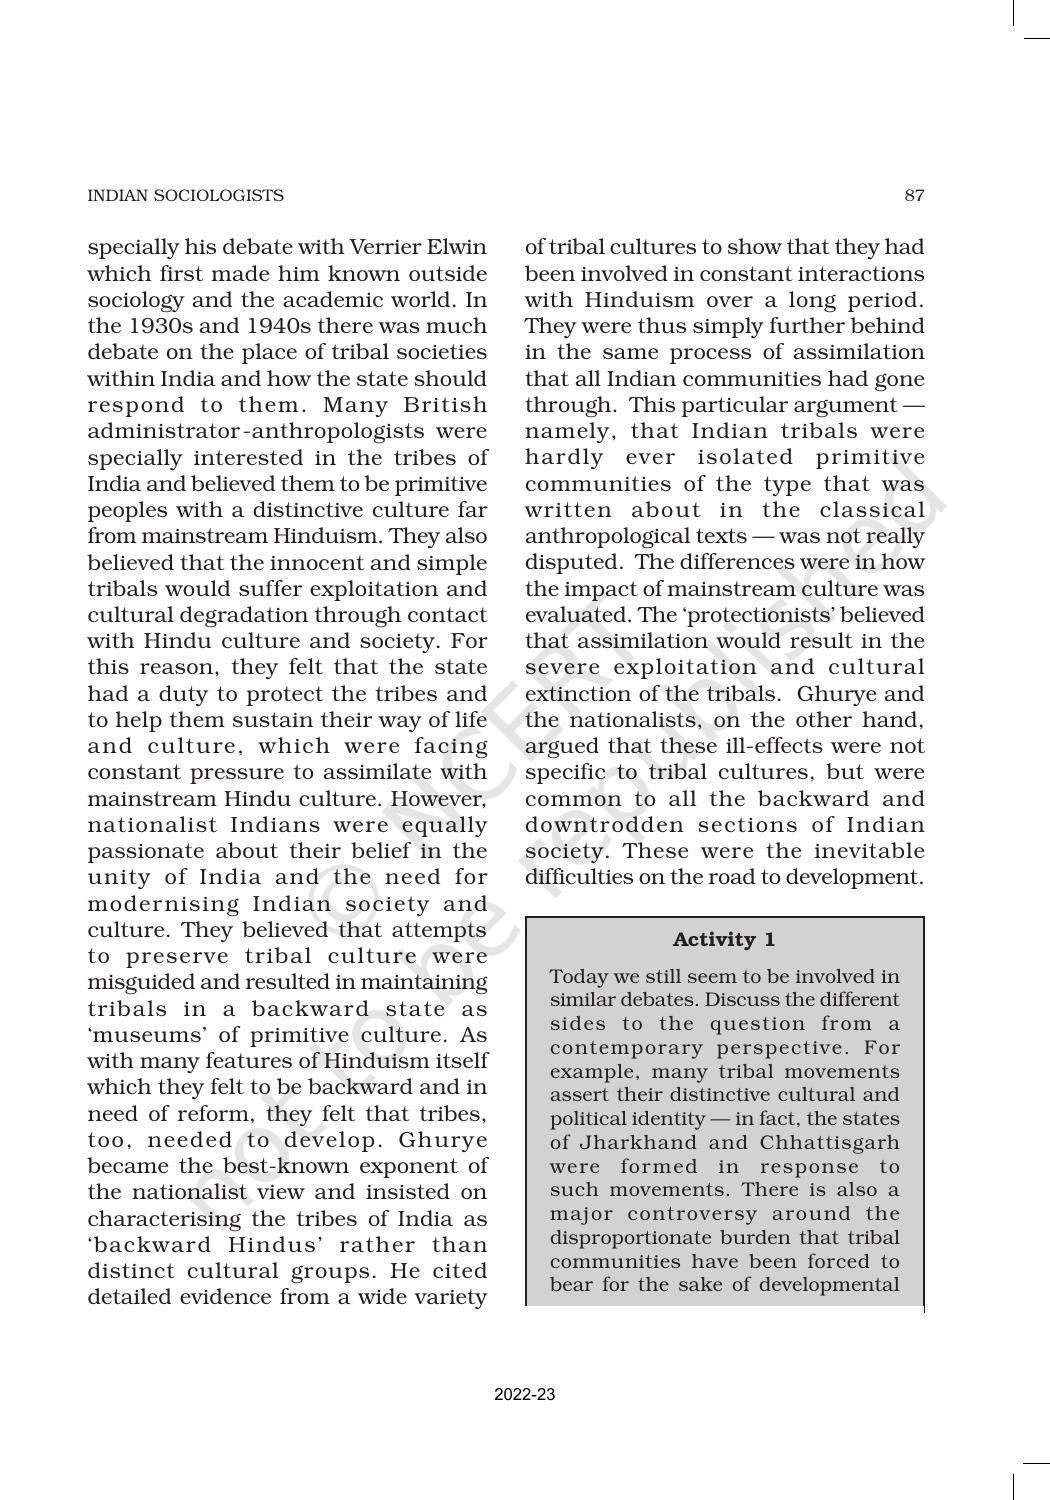 NCERT Book for Class 11 Sociology (Part-II) Chapter 5 Indian Sociologists - Page 5